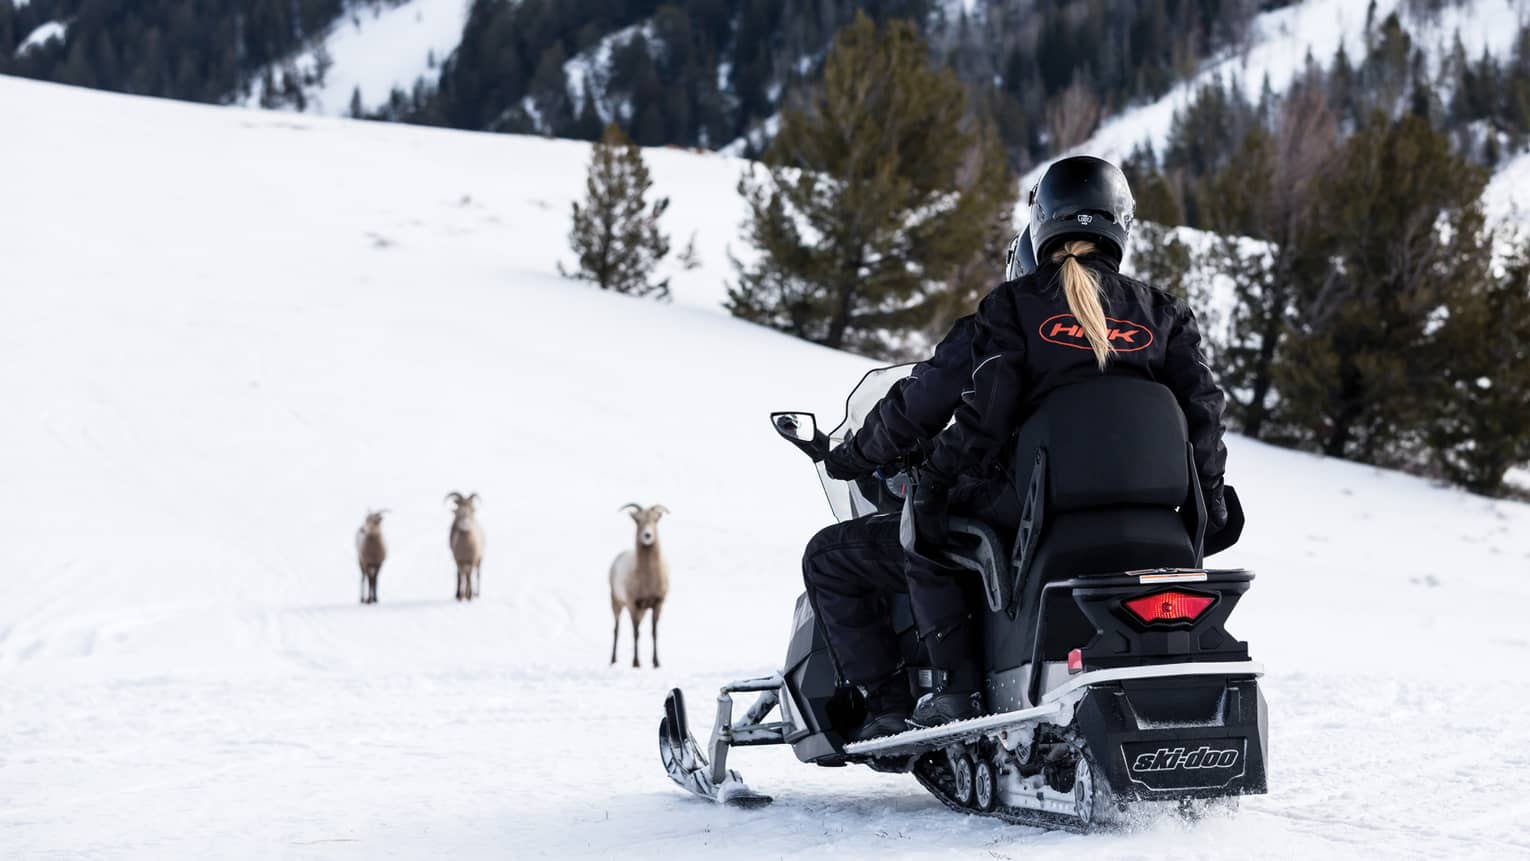 A woman on a snowmobile with a few goats in front of her in the snow.